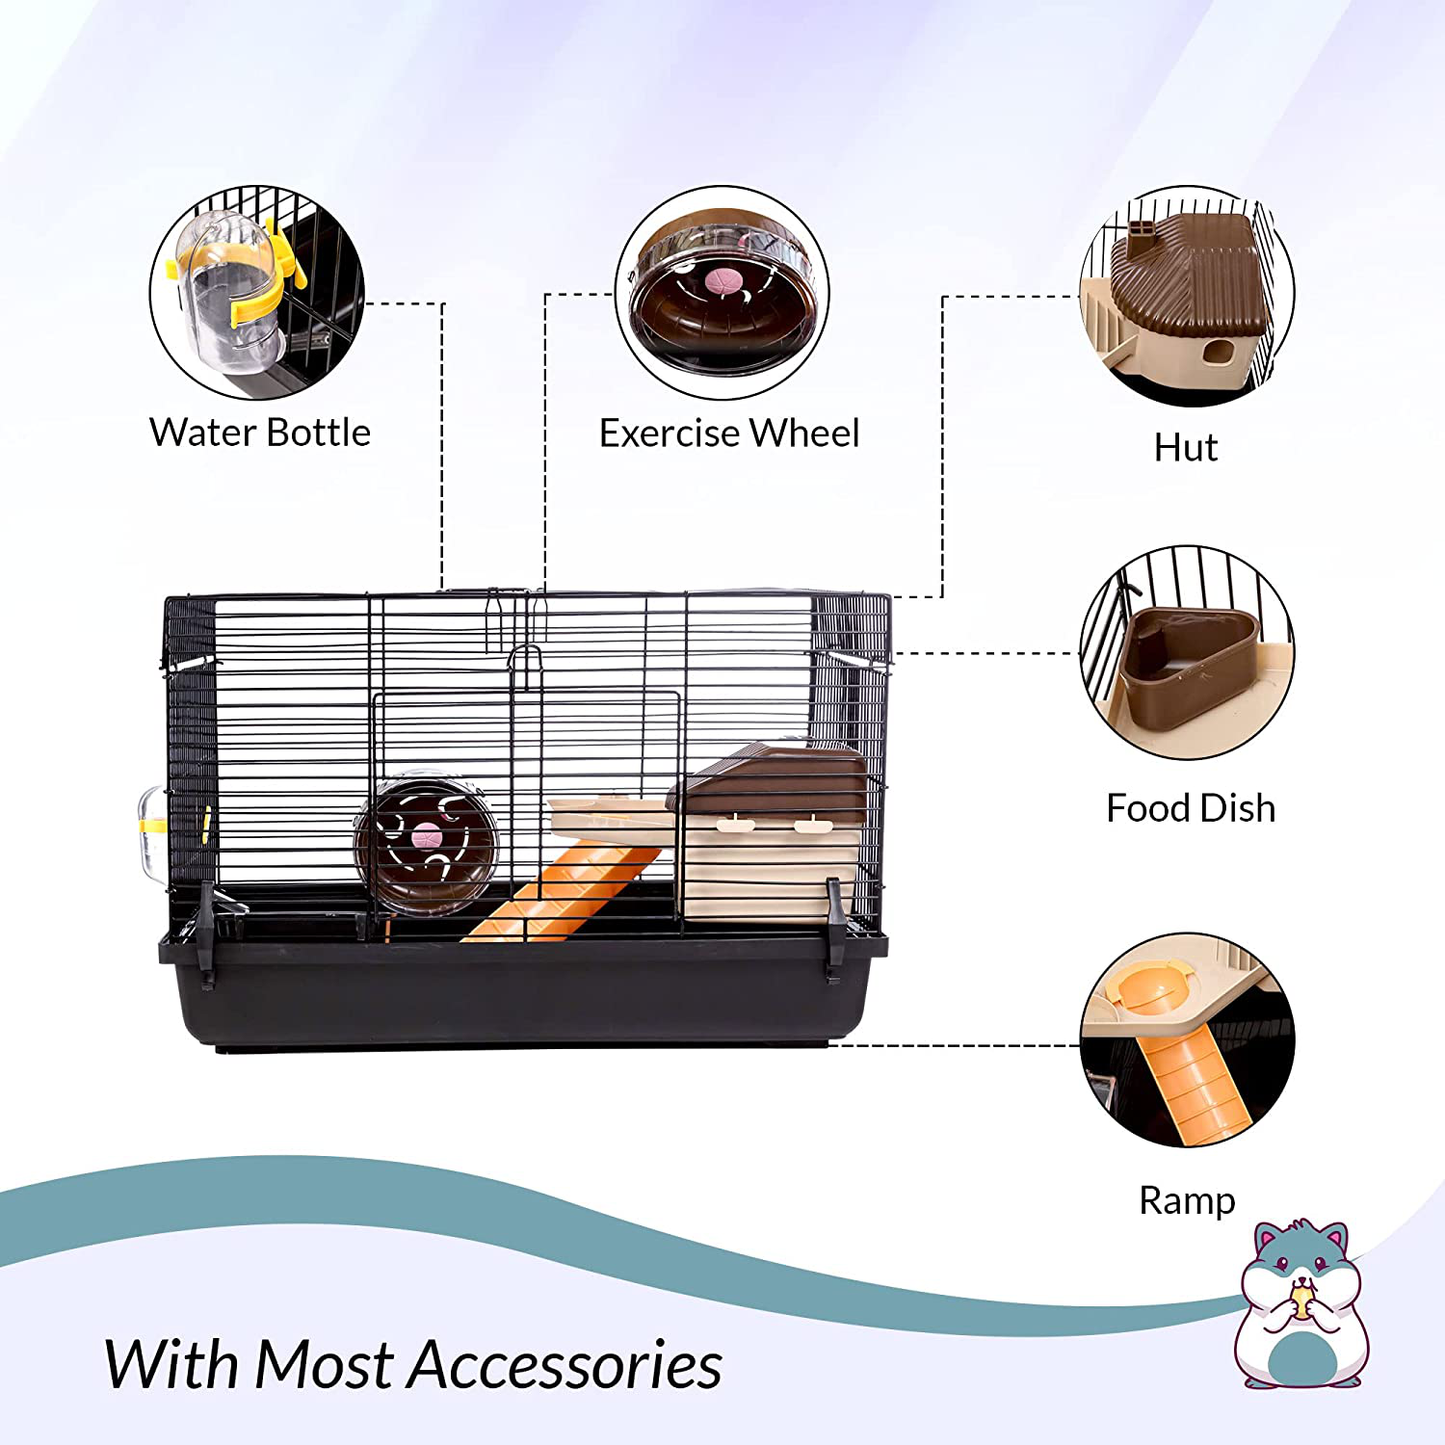 Hamster Cages and Habitats - Medium Size | Dwarf Hamster Cage Animals & Pet Supplies > Pet Supplies > Small Animal Supplies > Small Animal Habitats & Cages Emerging Green   